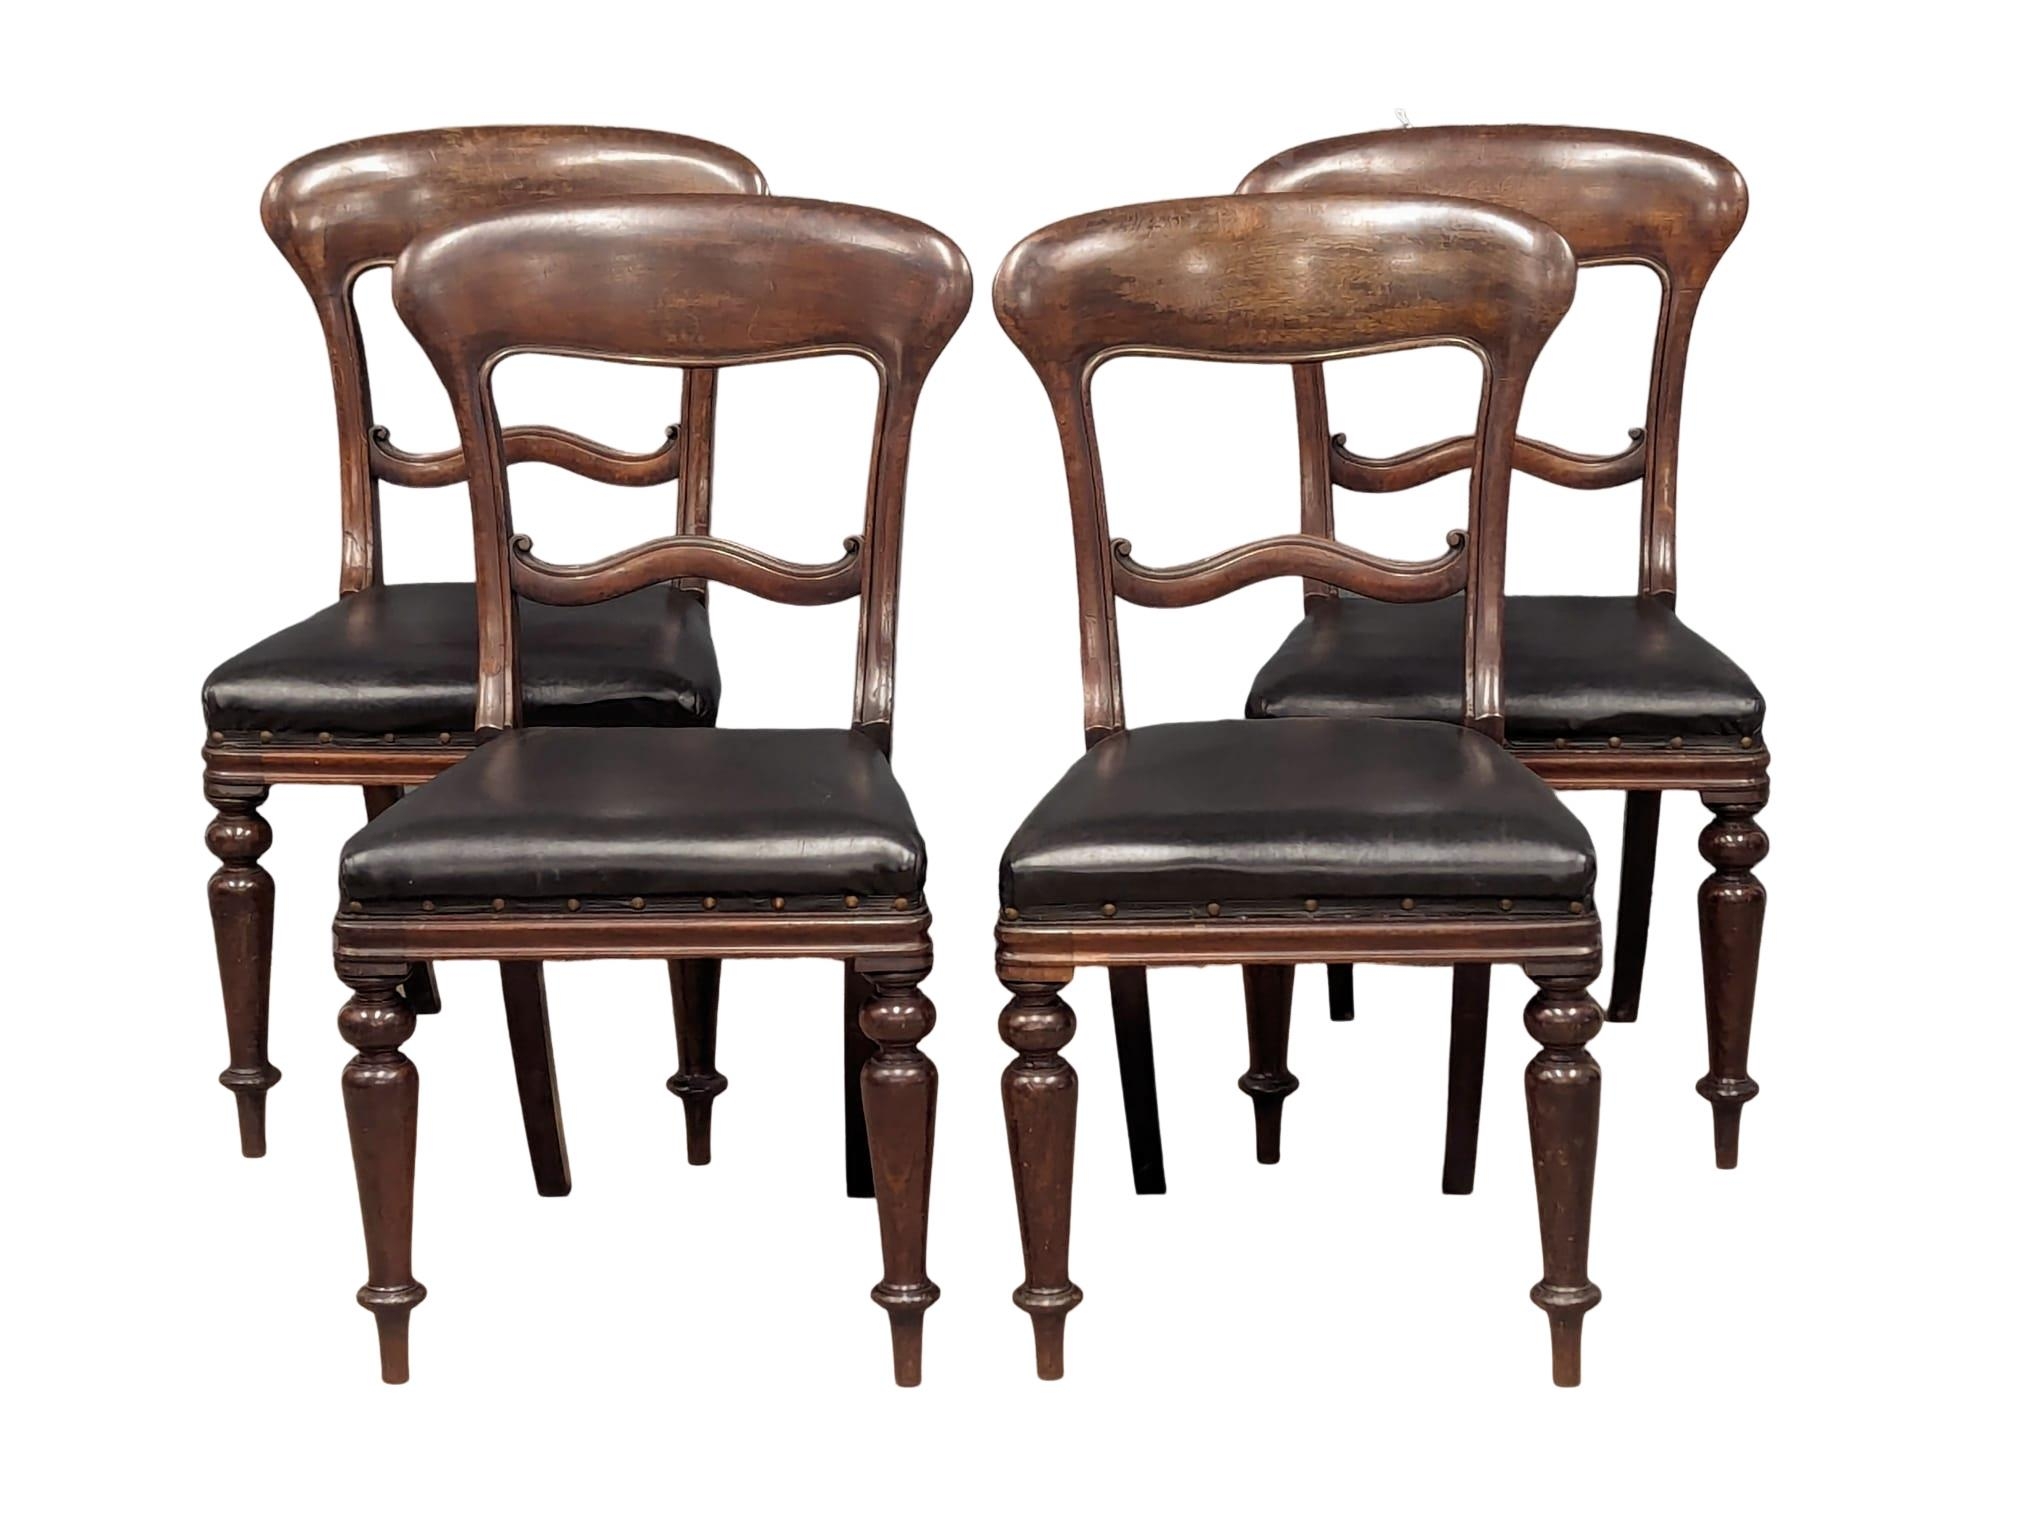 A set of 4 good quality Victorian mahogany dining chairs